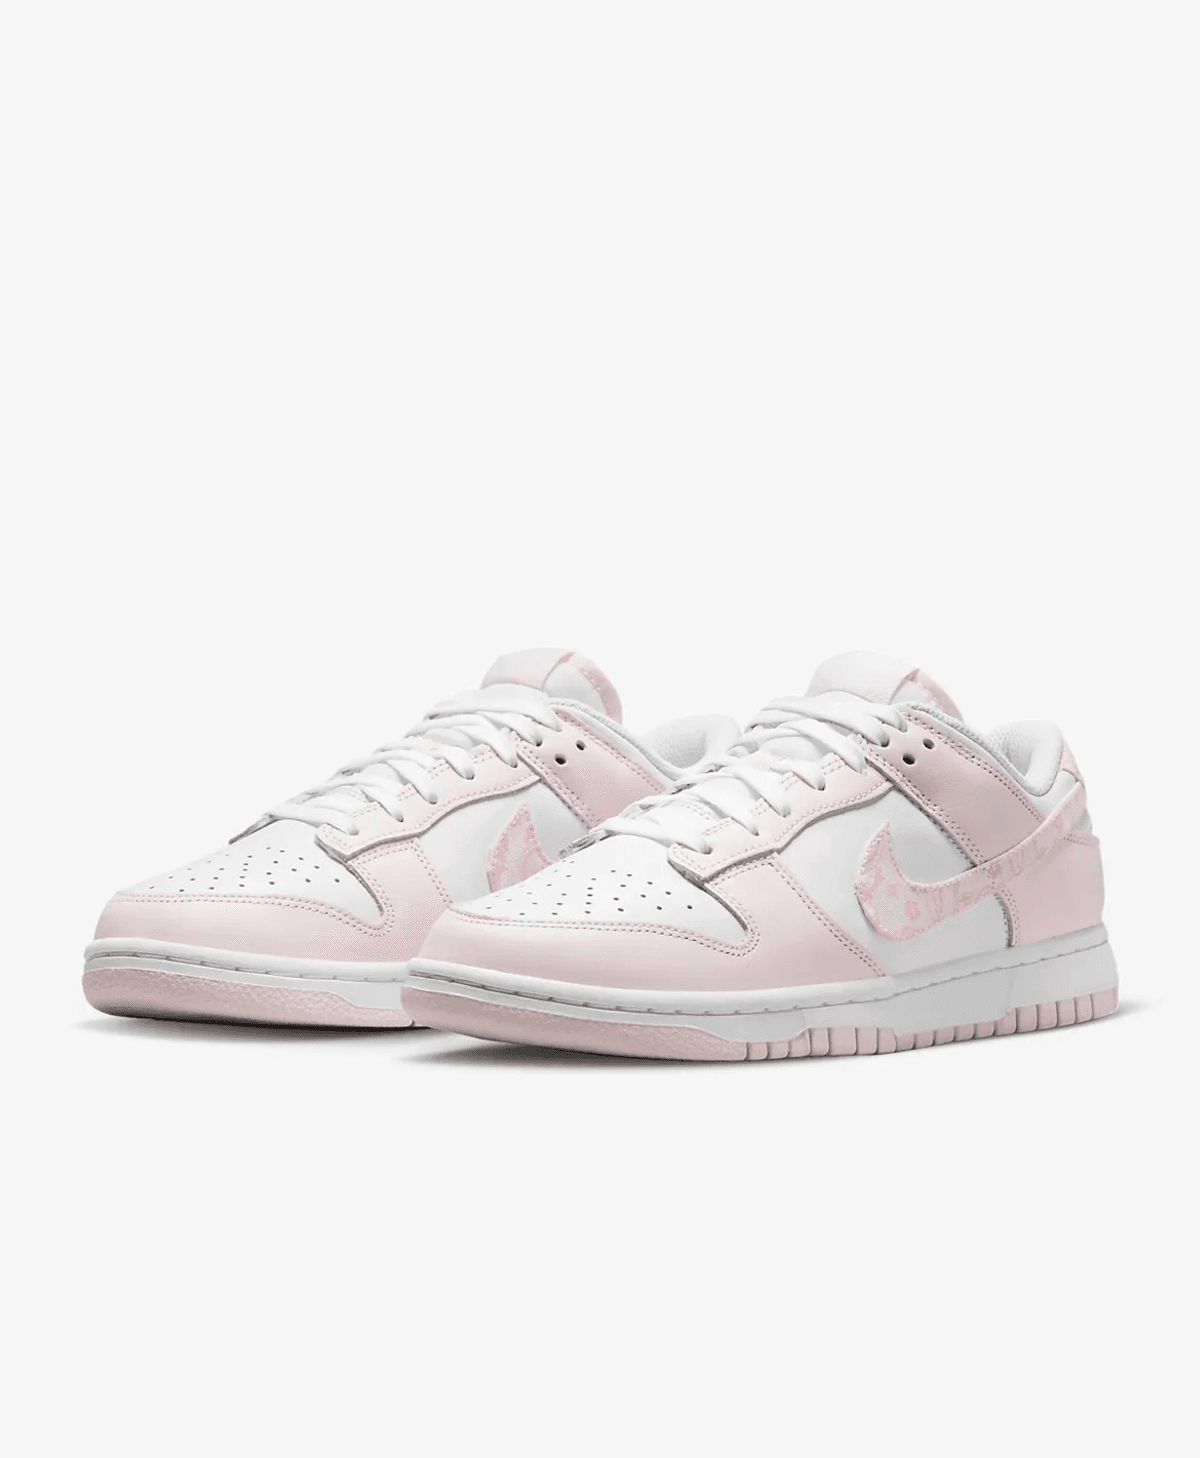 The Nike Dunk Low Pink Paisley Arrives Just In Time For Valentines Day